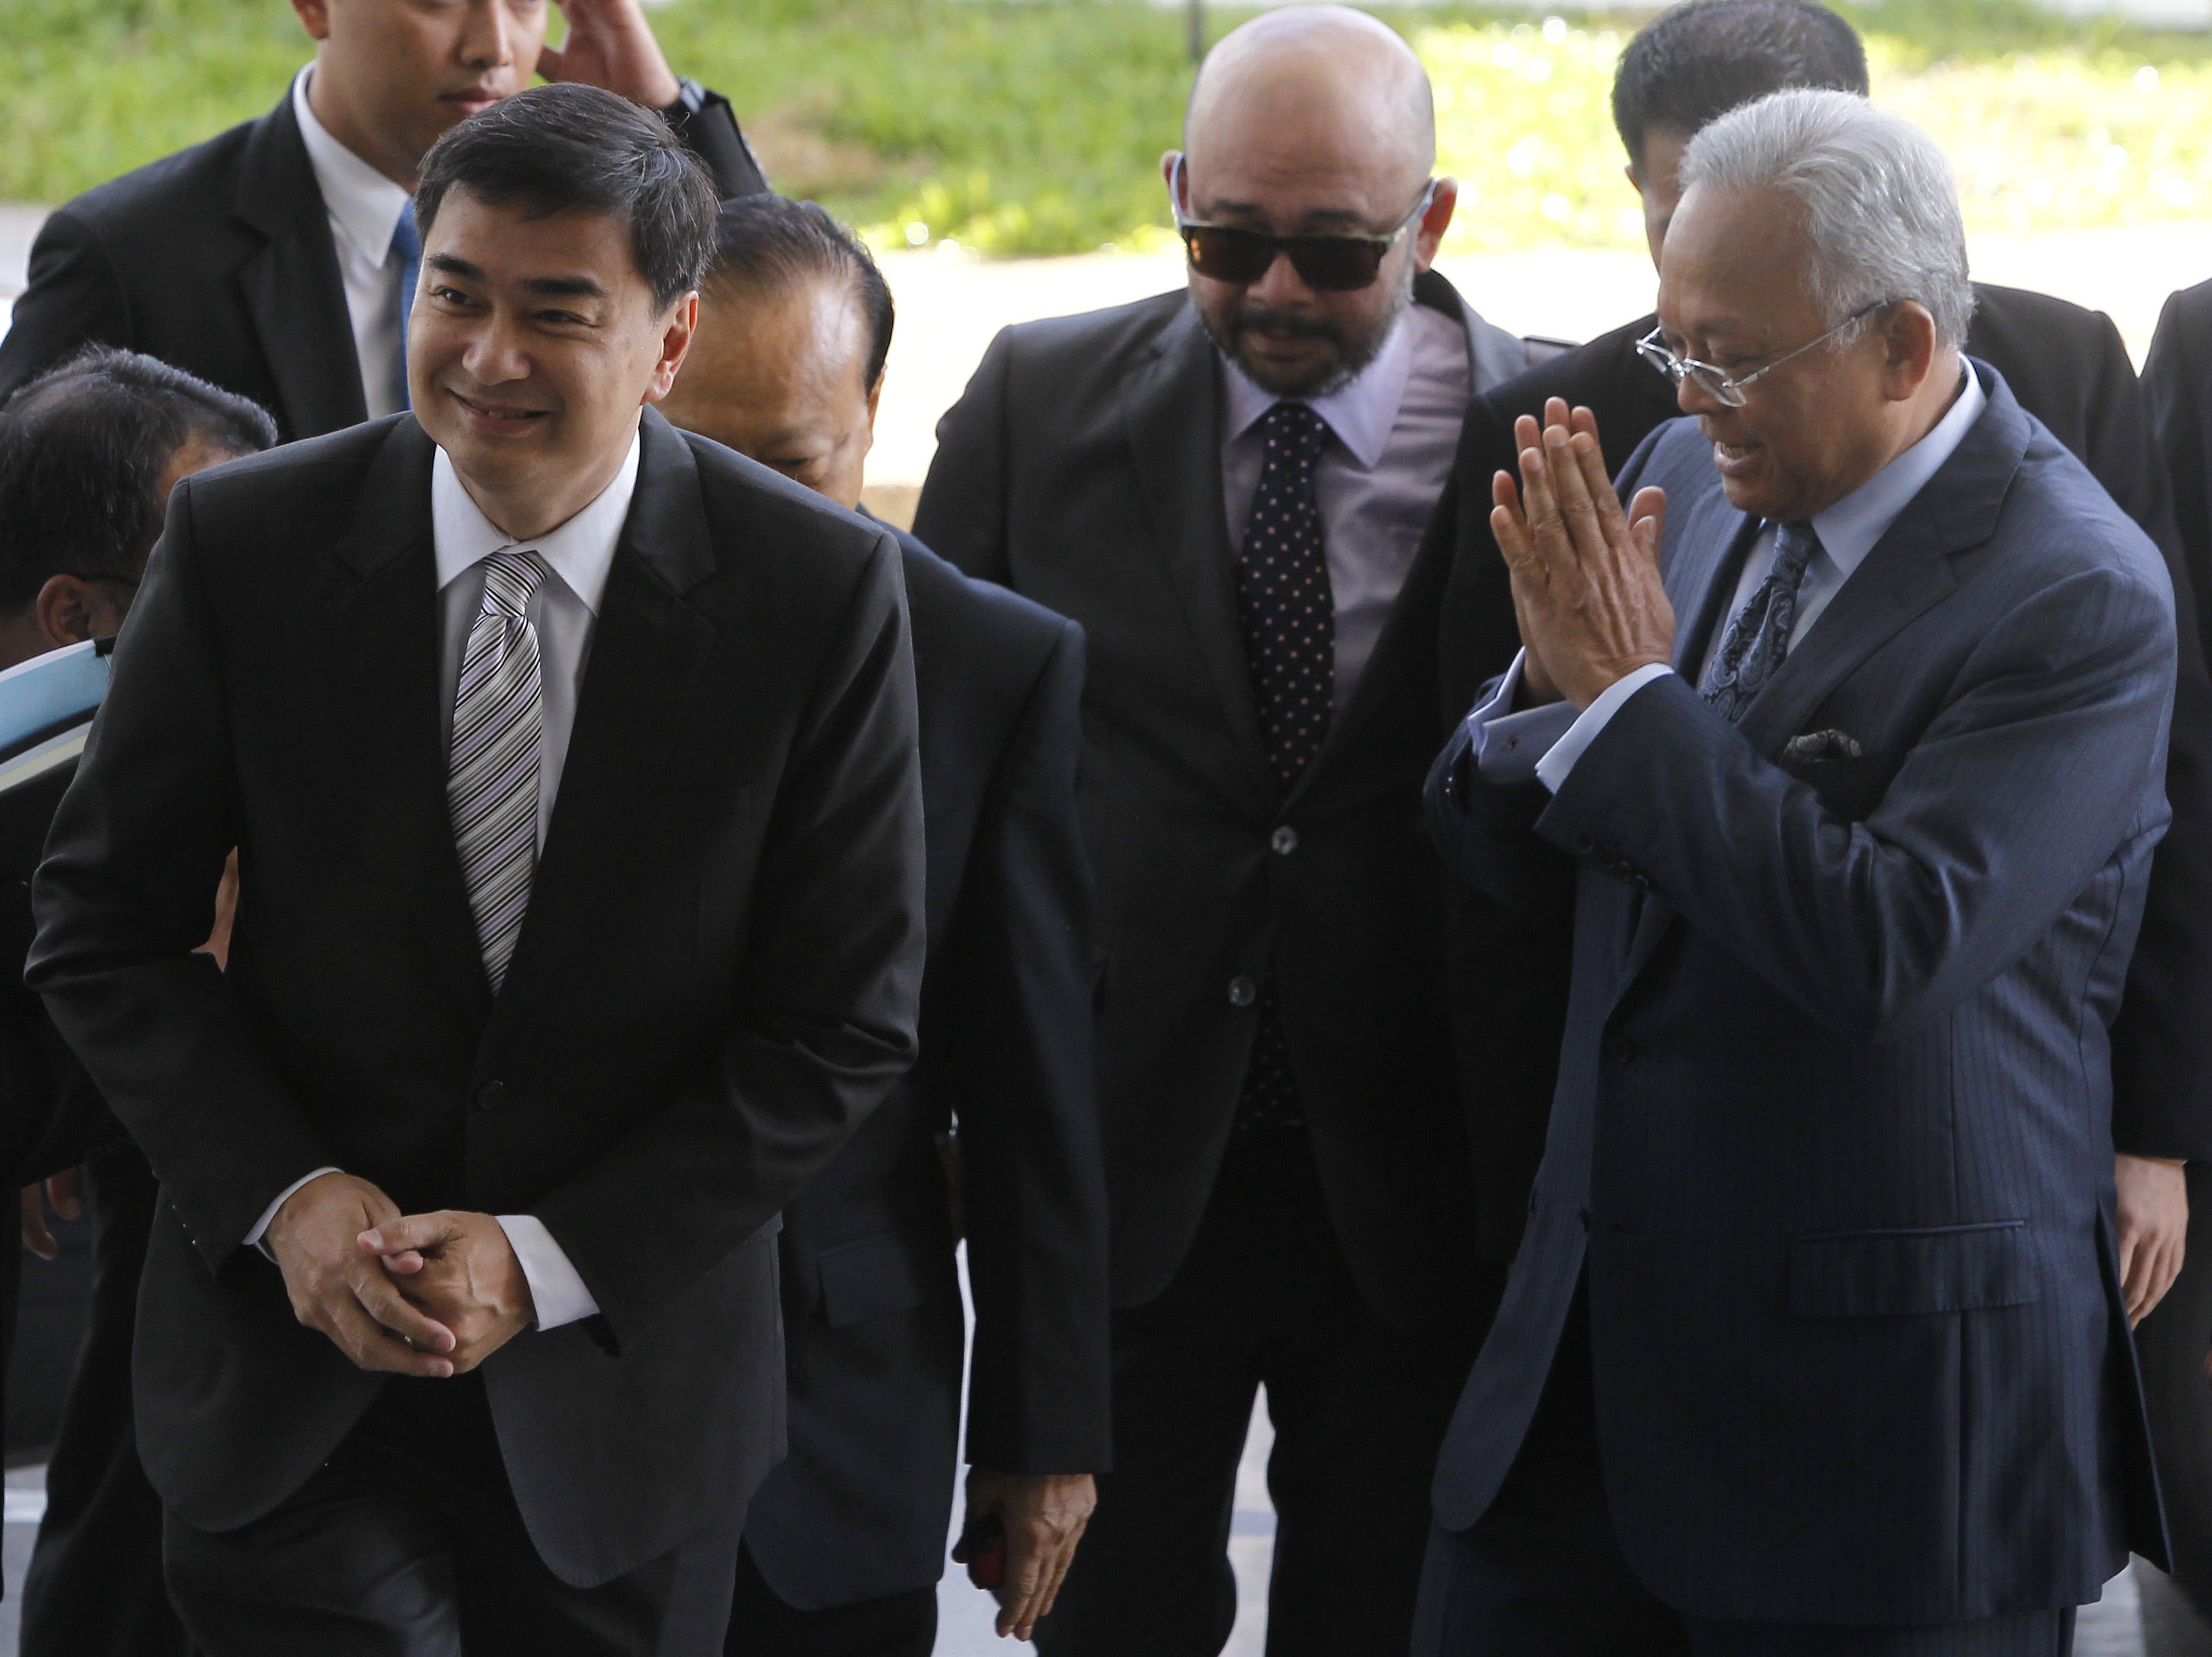 Former Thai Prime Minister Abhisit Vejjajiva, left, and his then deputy Suthep Thaugsuban arrive at the Department of Special Investigation in Bangkok on May 14, 2013. (Chaiwat Subprasom—Reuters)